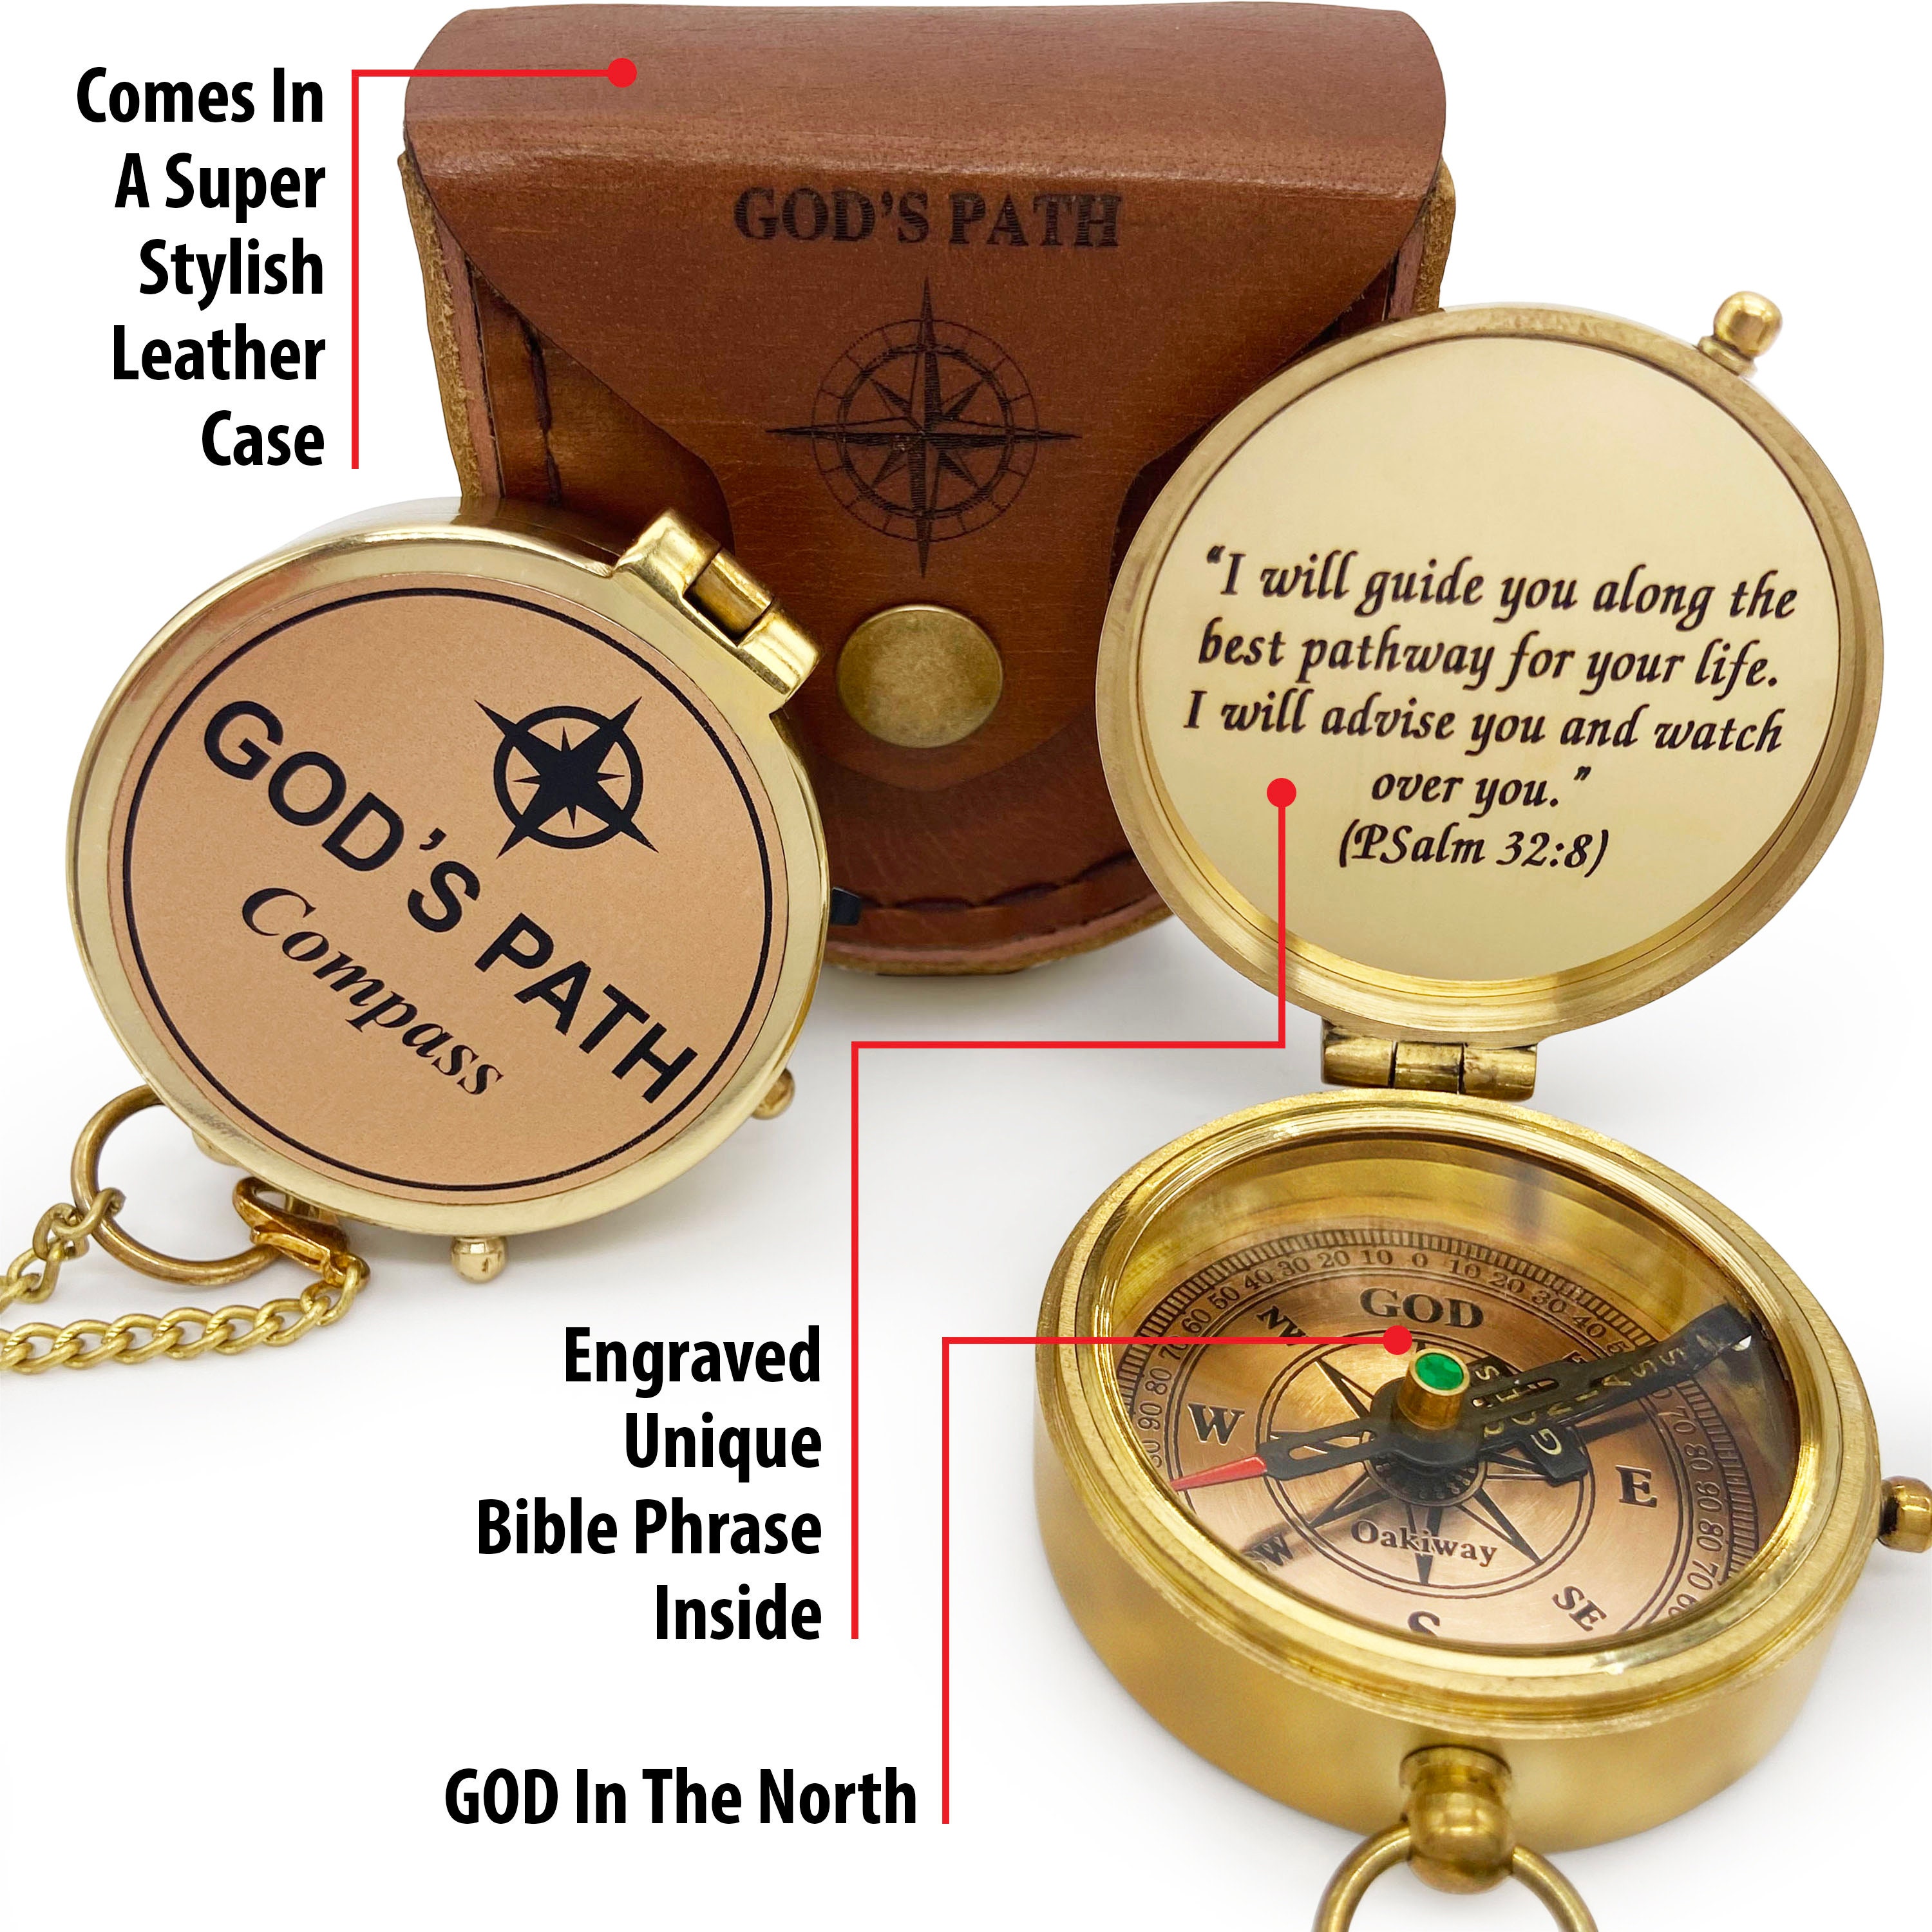 MAI Lord's Path Compass - Religious Gifts for Men, Baptism Gifts for Boys,  Communion, Confirmation, Christian Gifts,Graduation, Catholic, Personalized